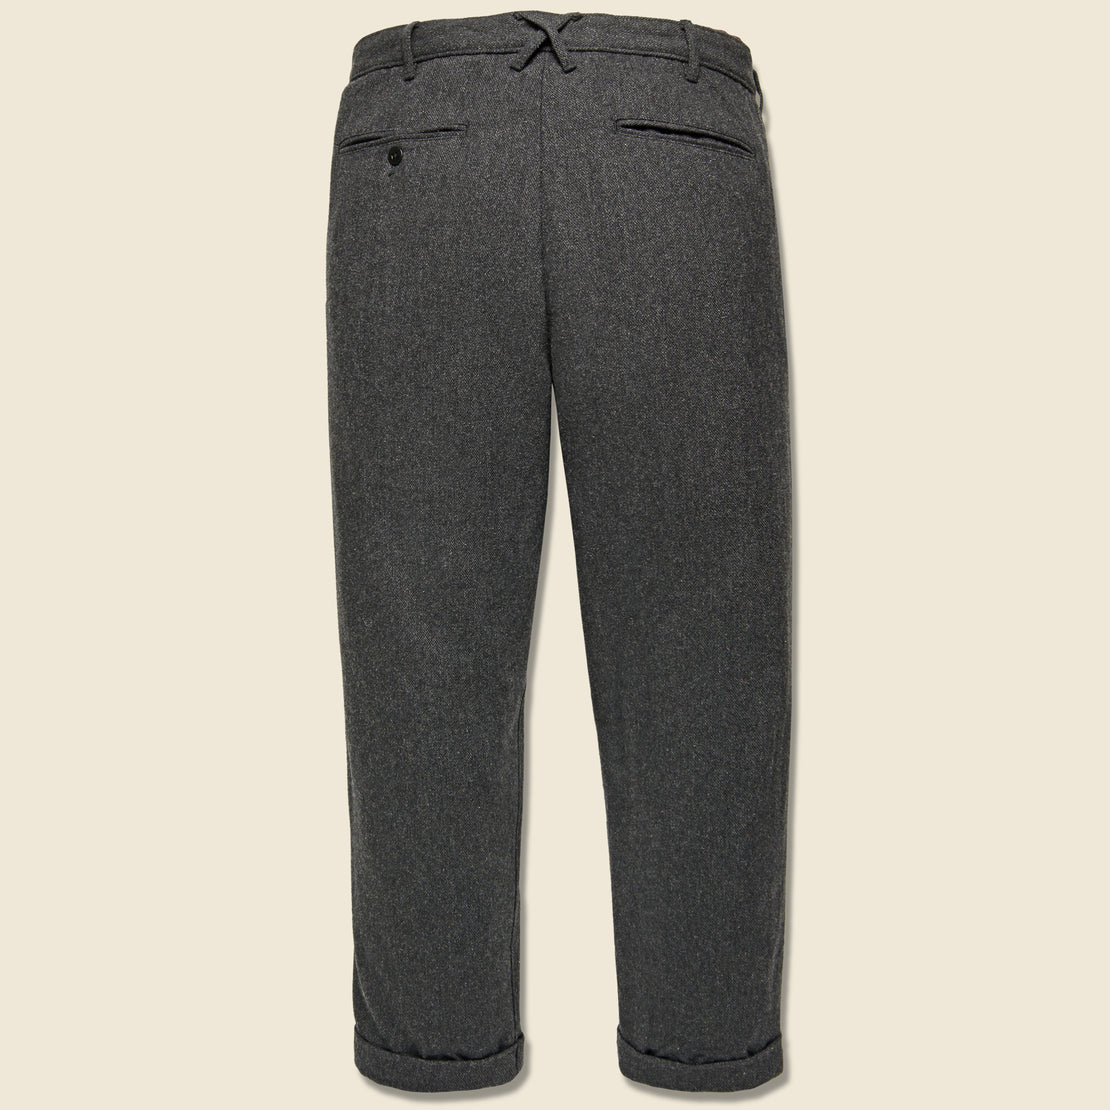 Herringbone Pleated Pant - Charcoal - Alex Mill - STAG Provisions - Suiting - Suit Pant